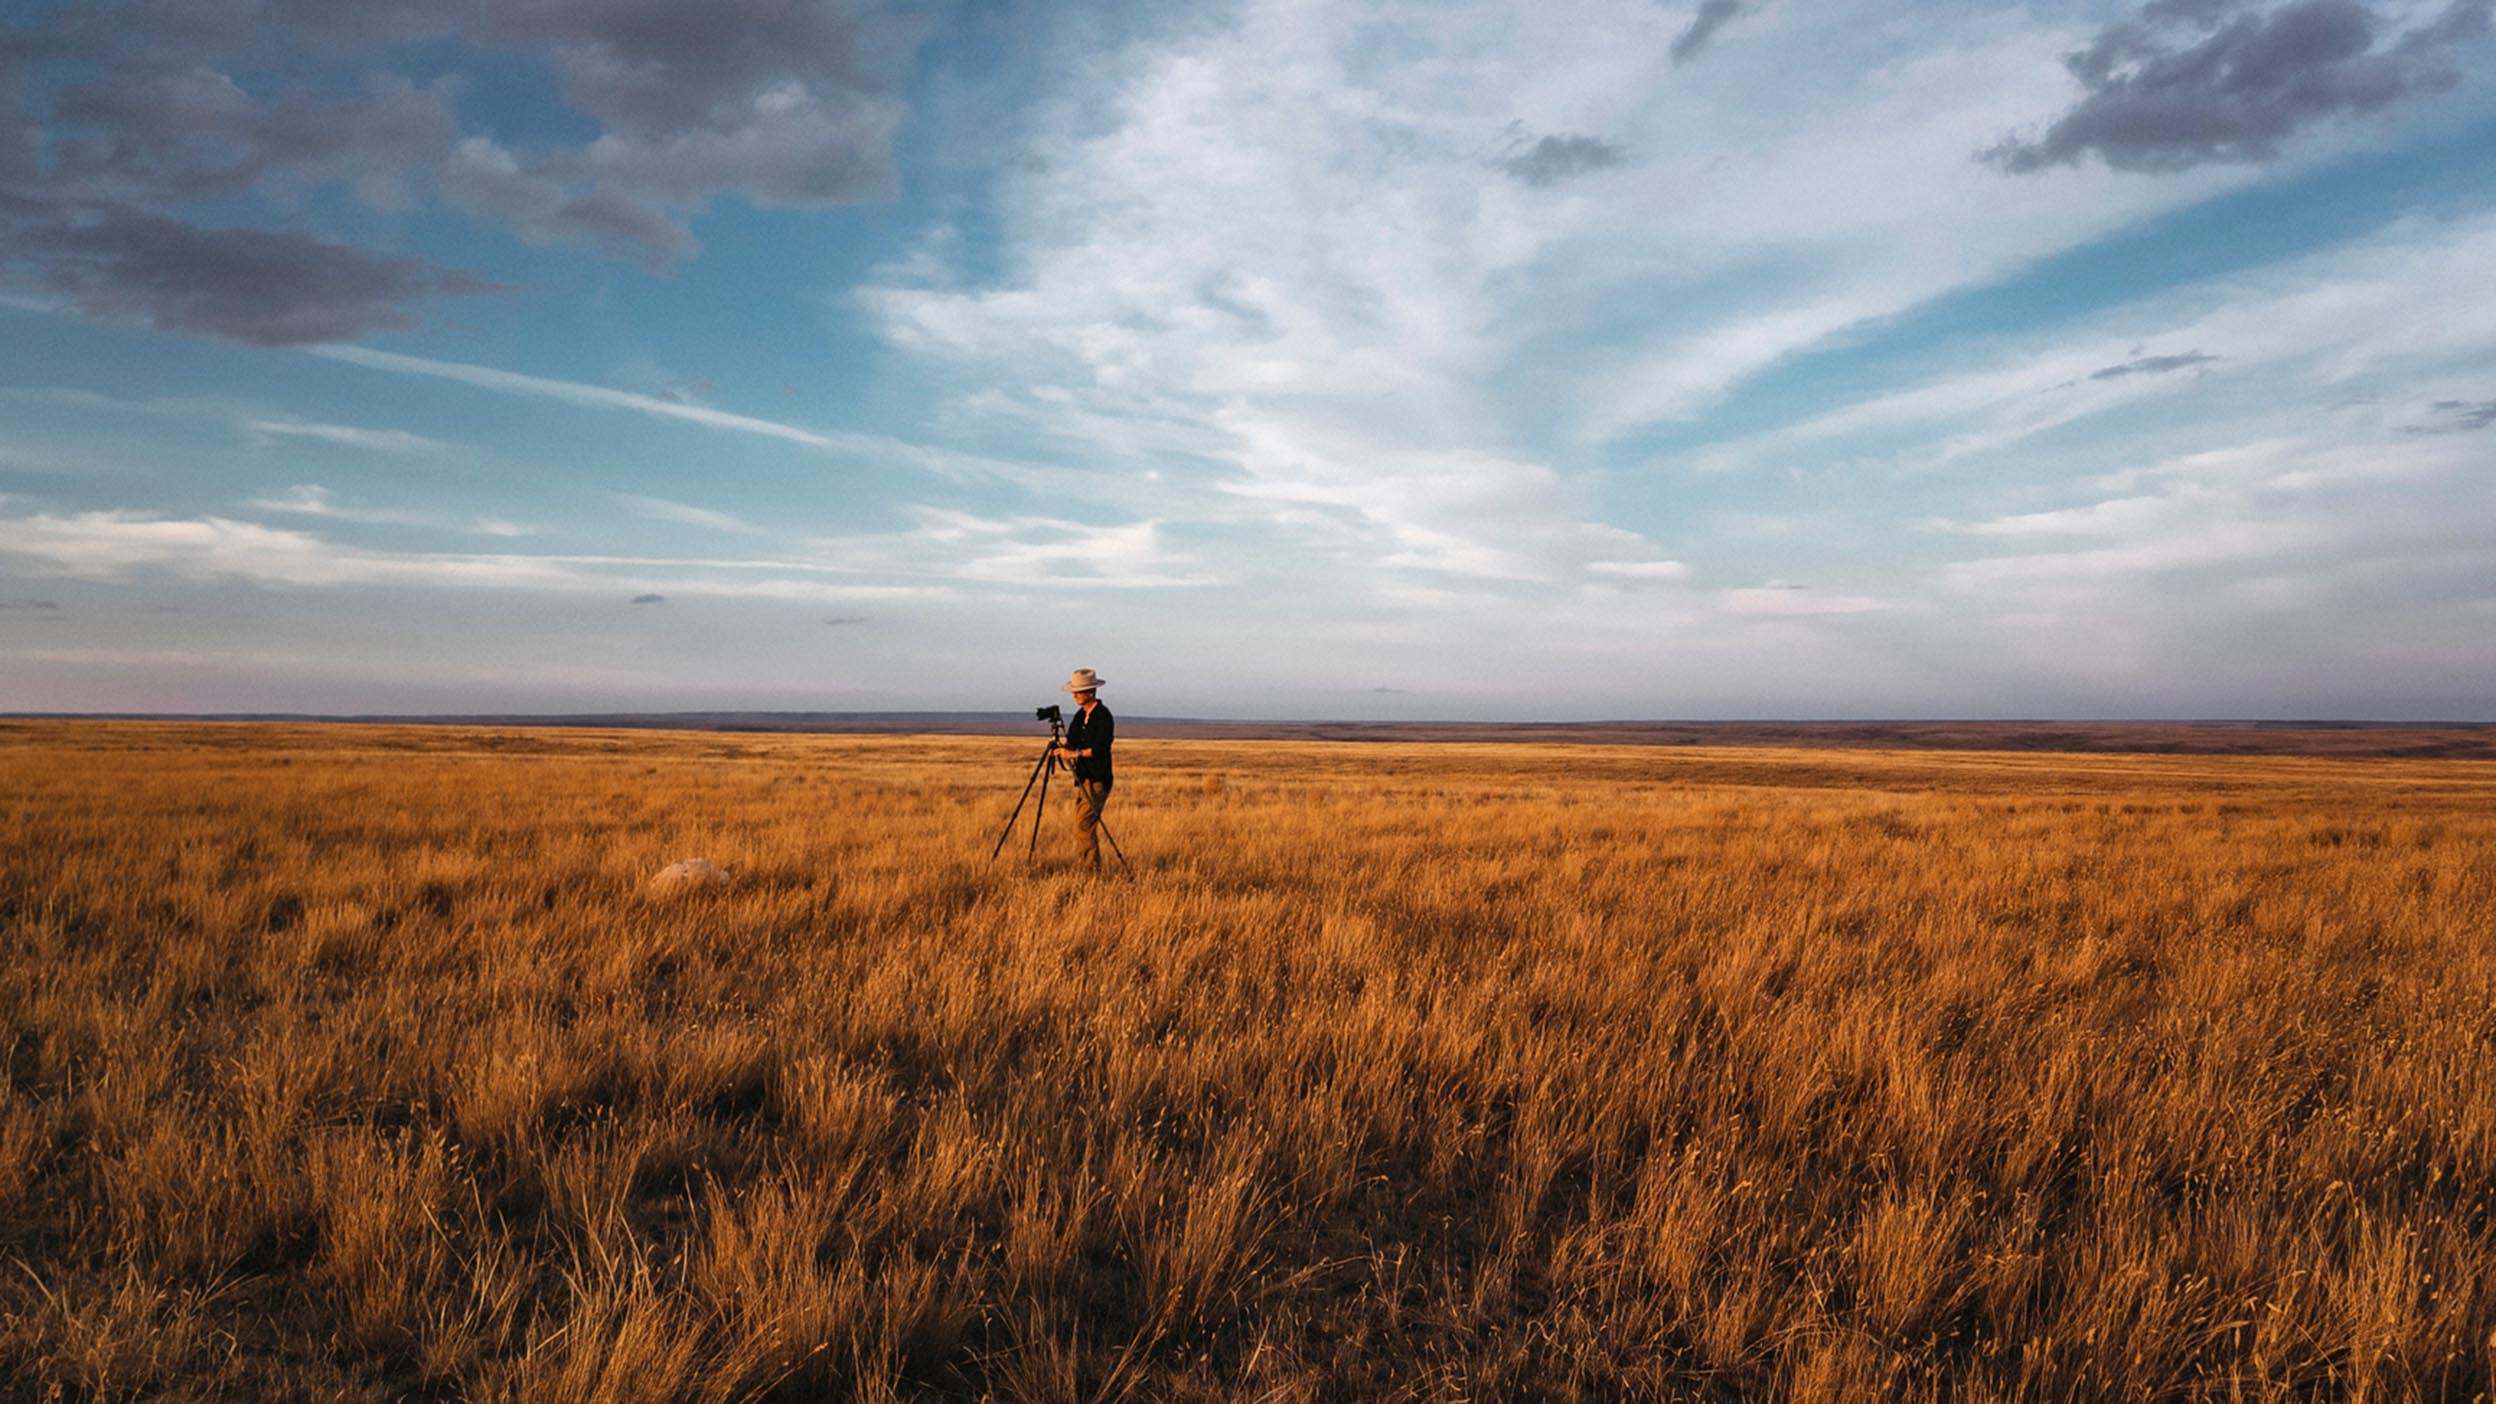 A photographer working alone in a grassy field at sunset contemplates his surroundings and the current state of the market.